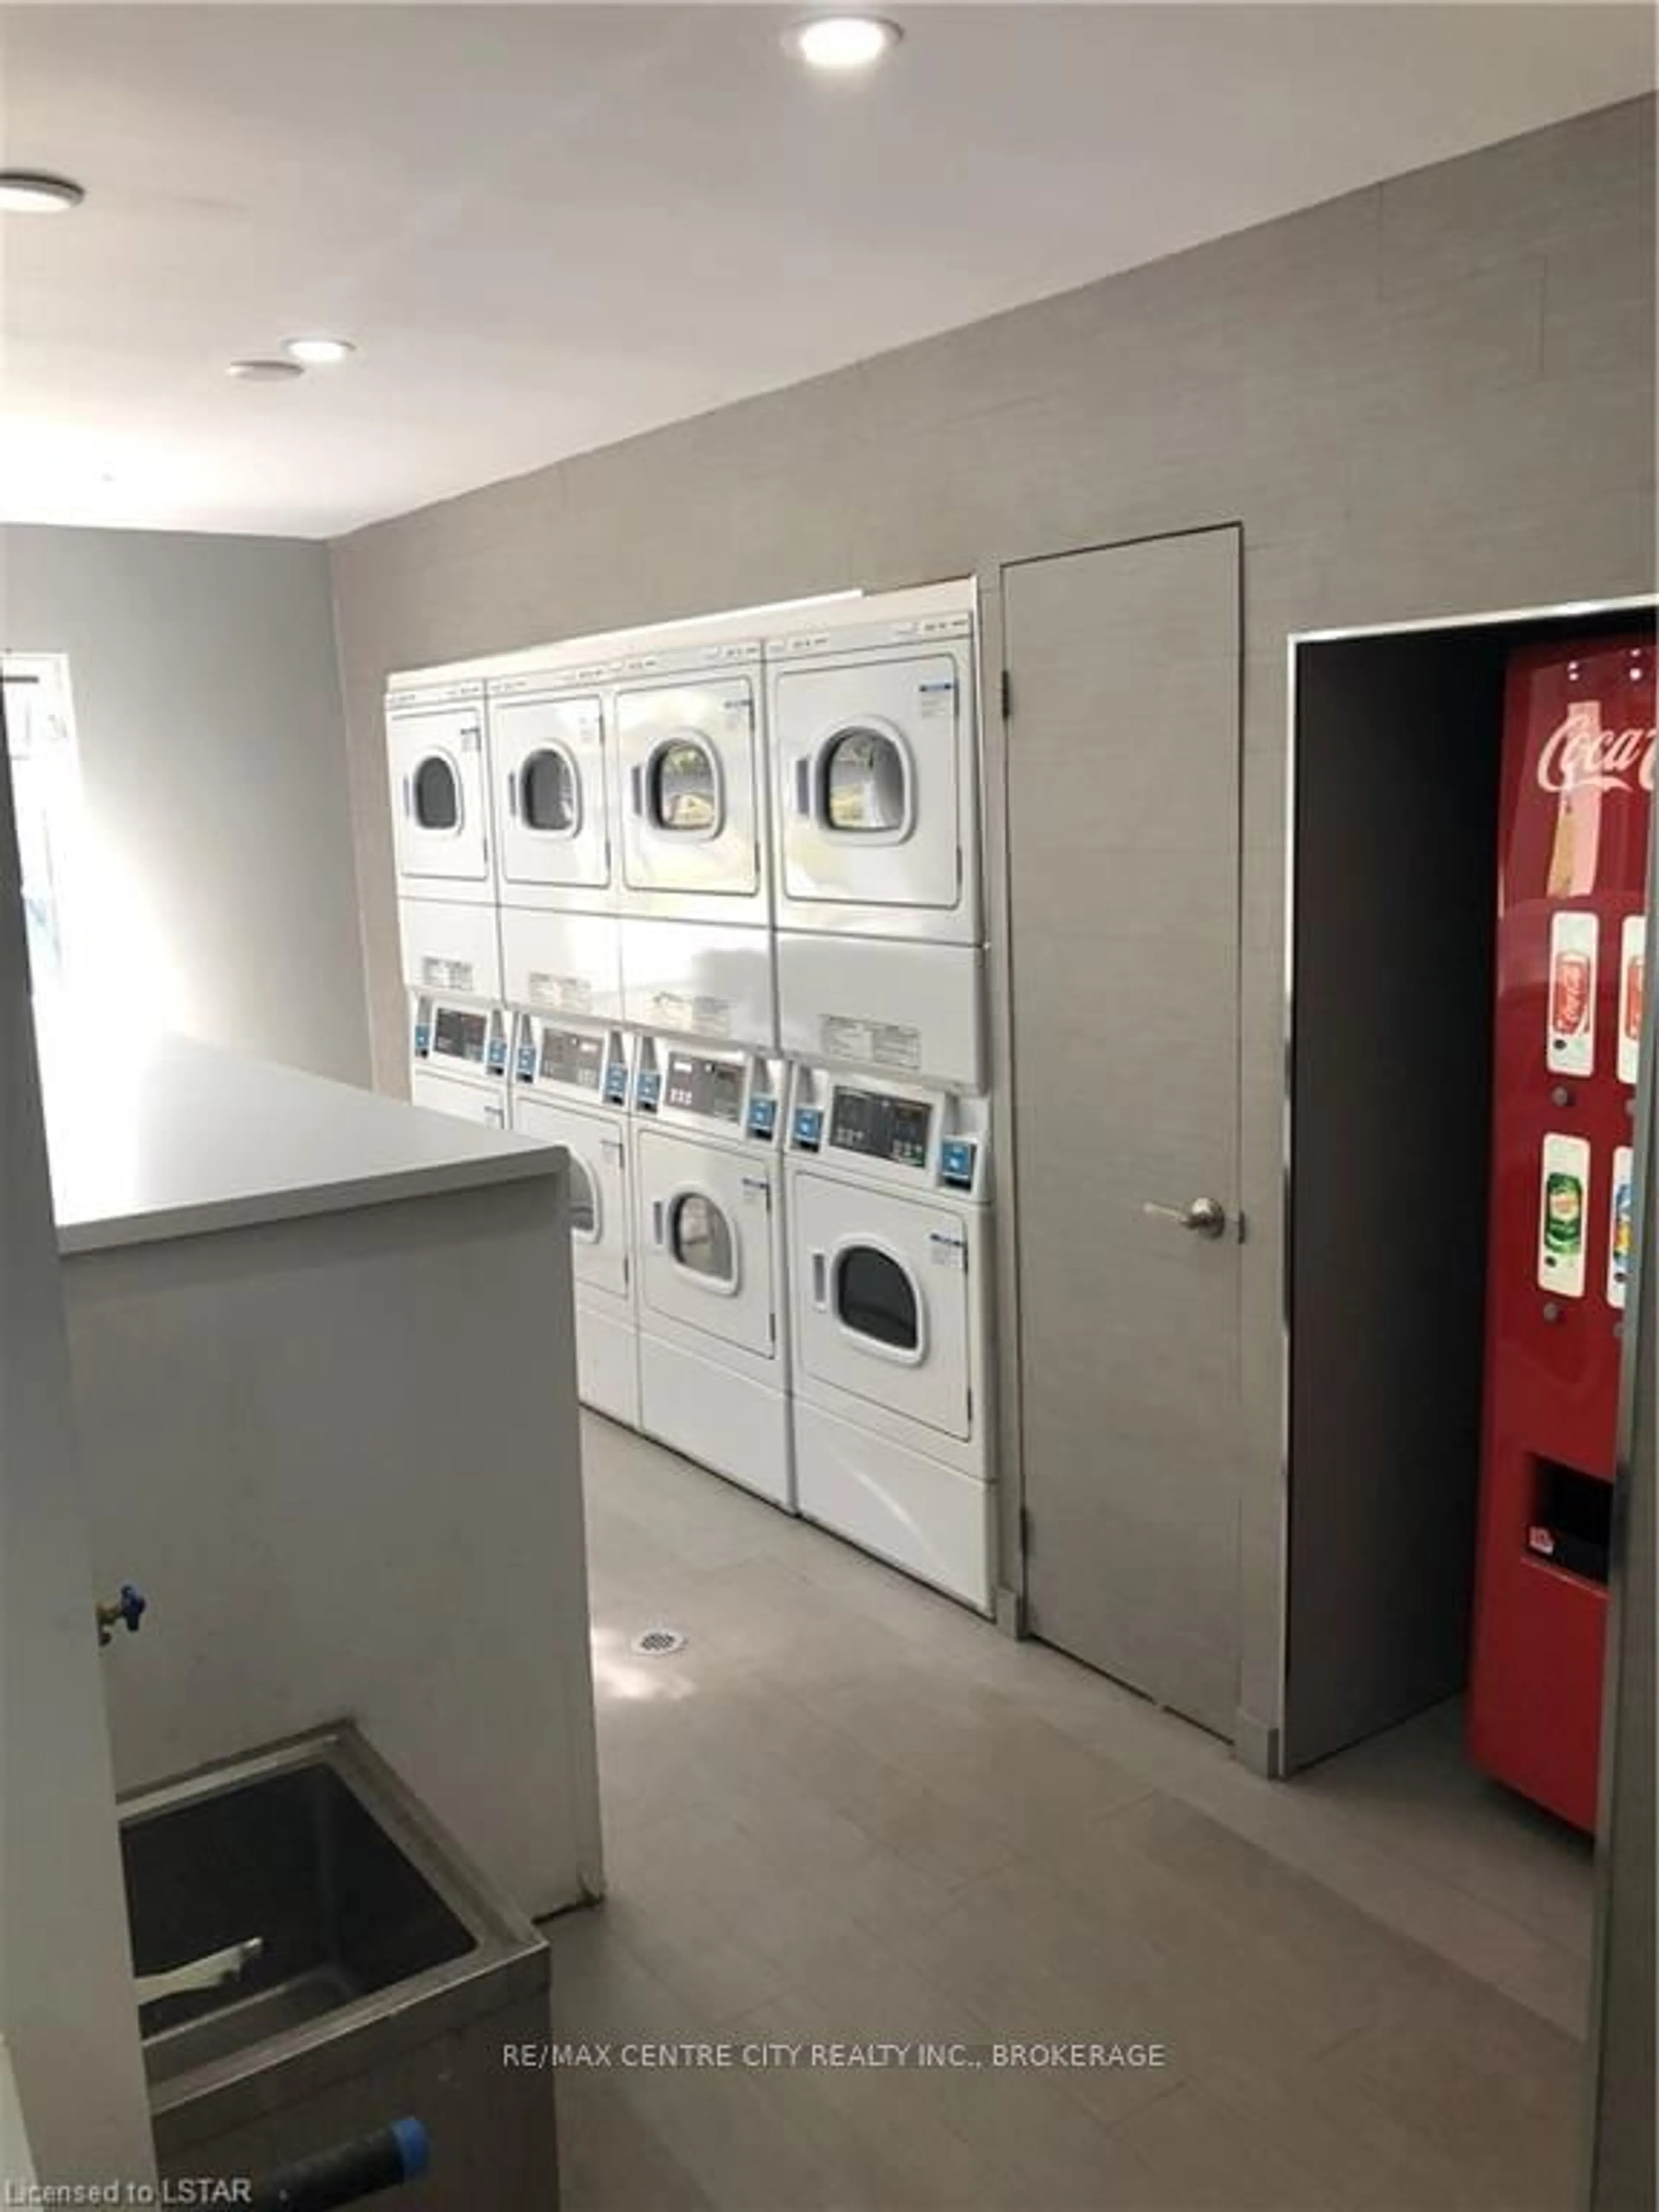 Laundry room for 563 Mornington Ave #102, London Ontario N5Y 4T8